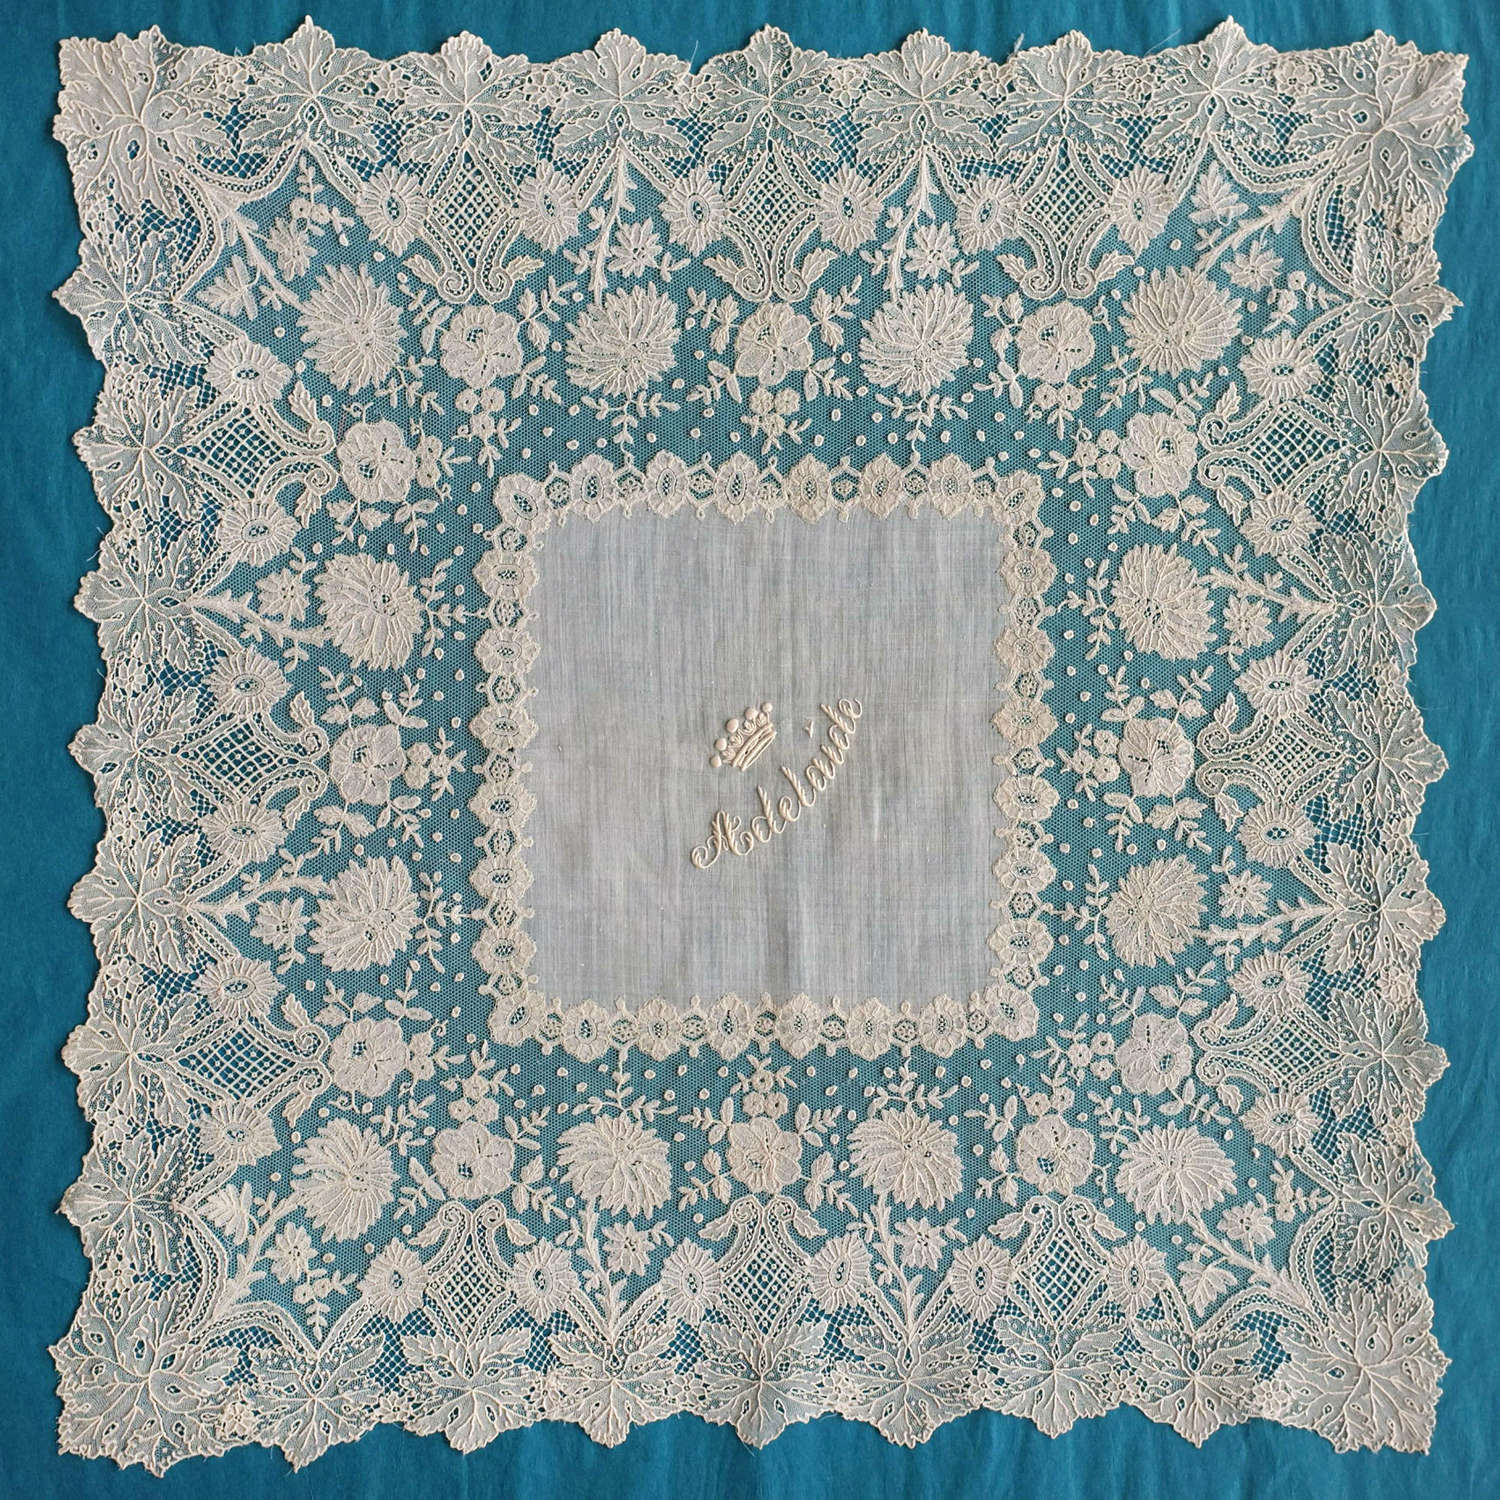 Antique Brussels Bobbin and Needle Lace Handkerchief 'Adelaide'